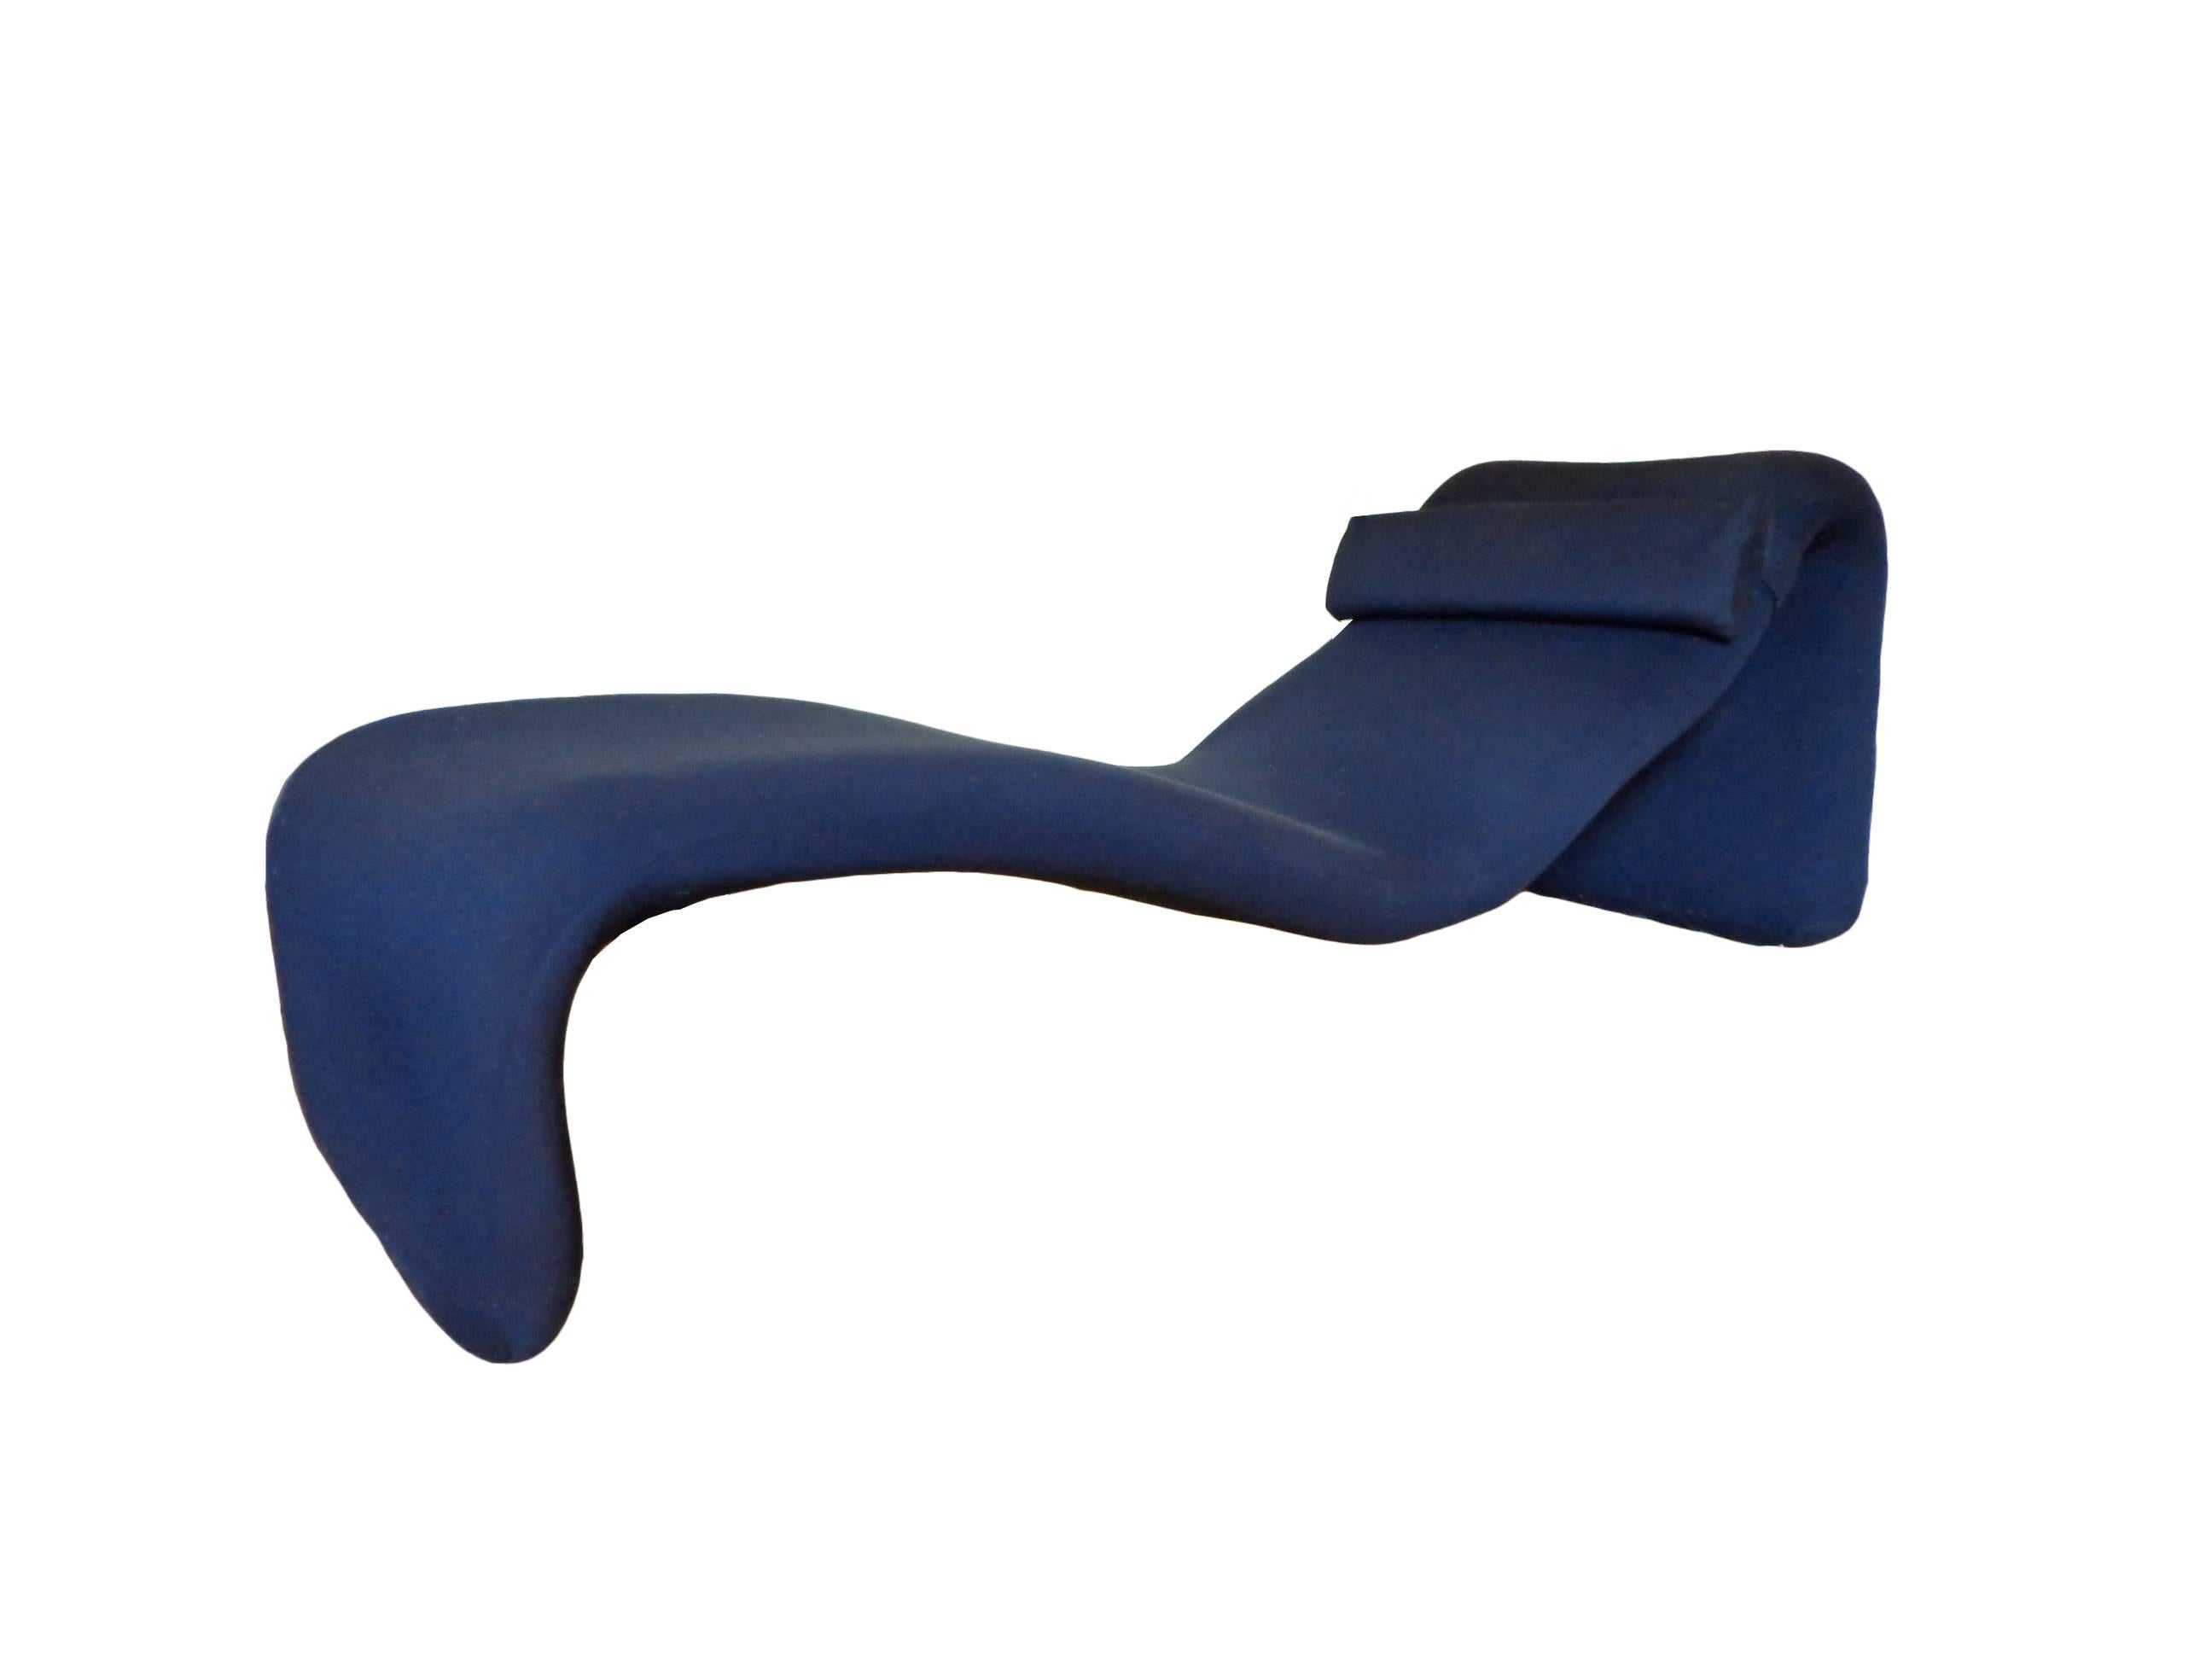 Offerd by Zitzo, Amsterdam this Olivier Mourgue Djinn chaise longue chair, model 8412.
Original upholstery, steel frame.
 
Olivier Mourgue (borne 1939, France) worked with the French manufacturer ‘Airborne International’ (located in